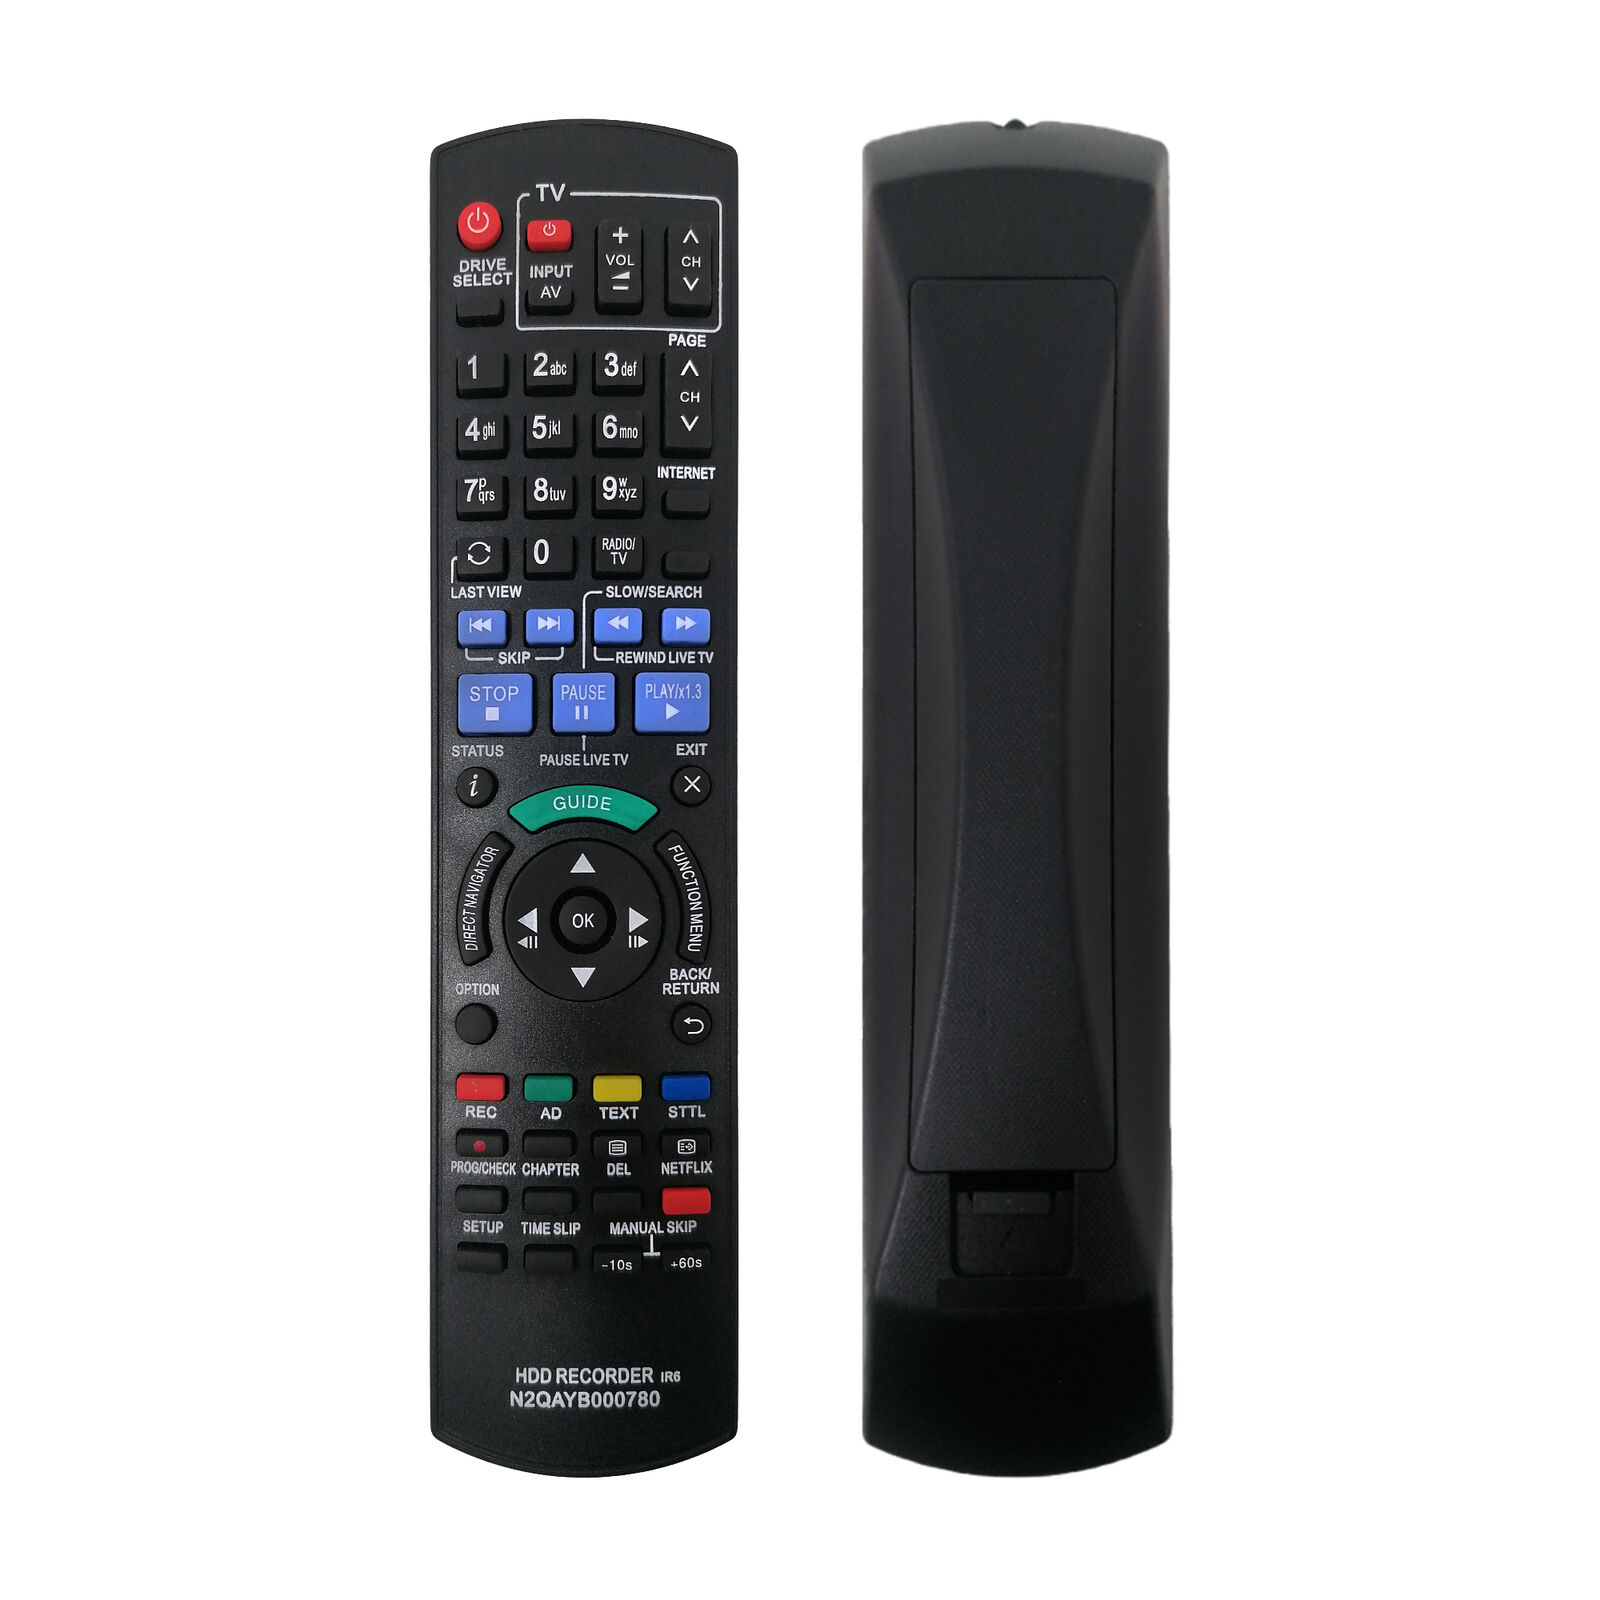 New Remote For Panasonic DMR-HWT130 500GB Freeview+ HD Smart TV Recorder UK